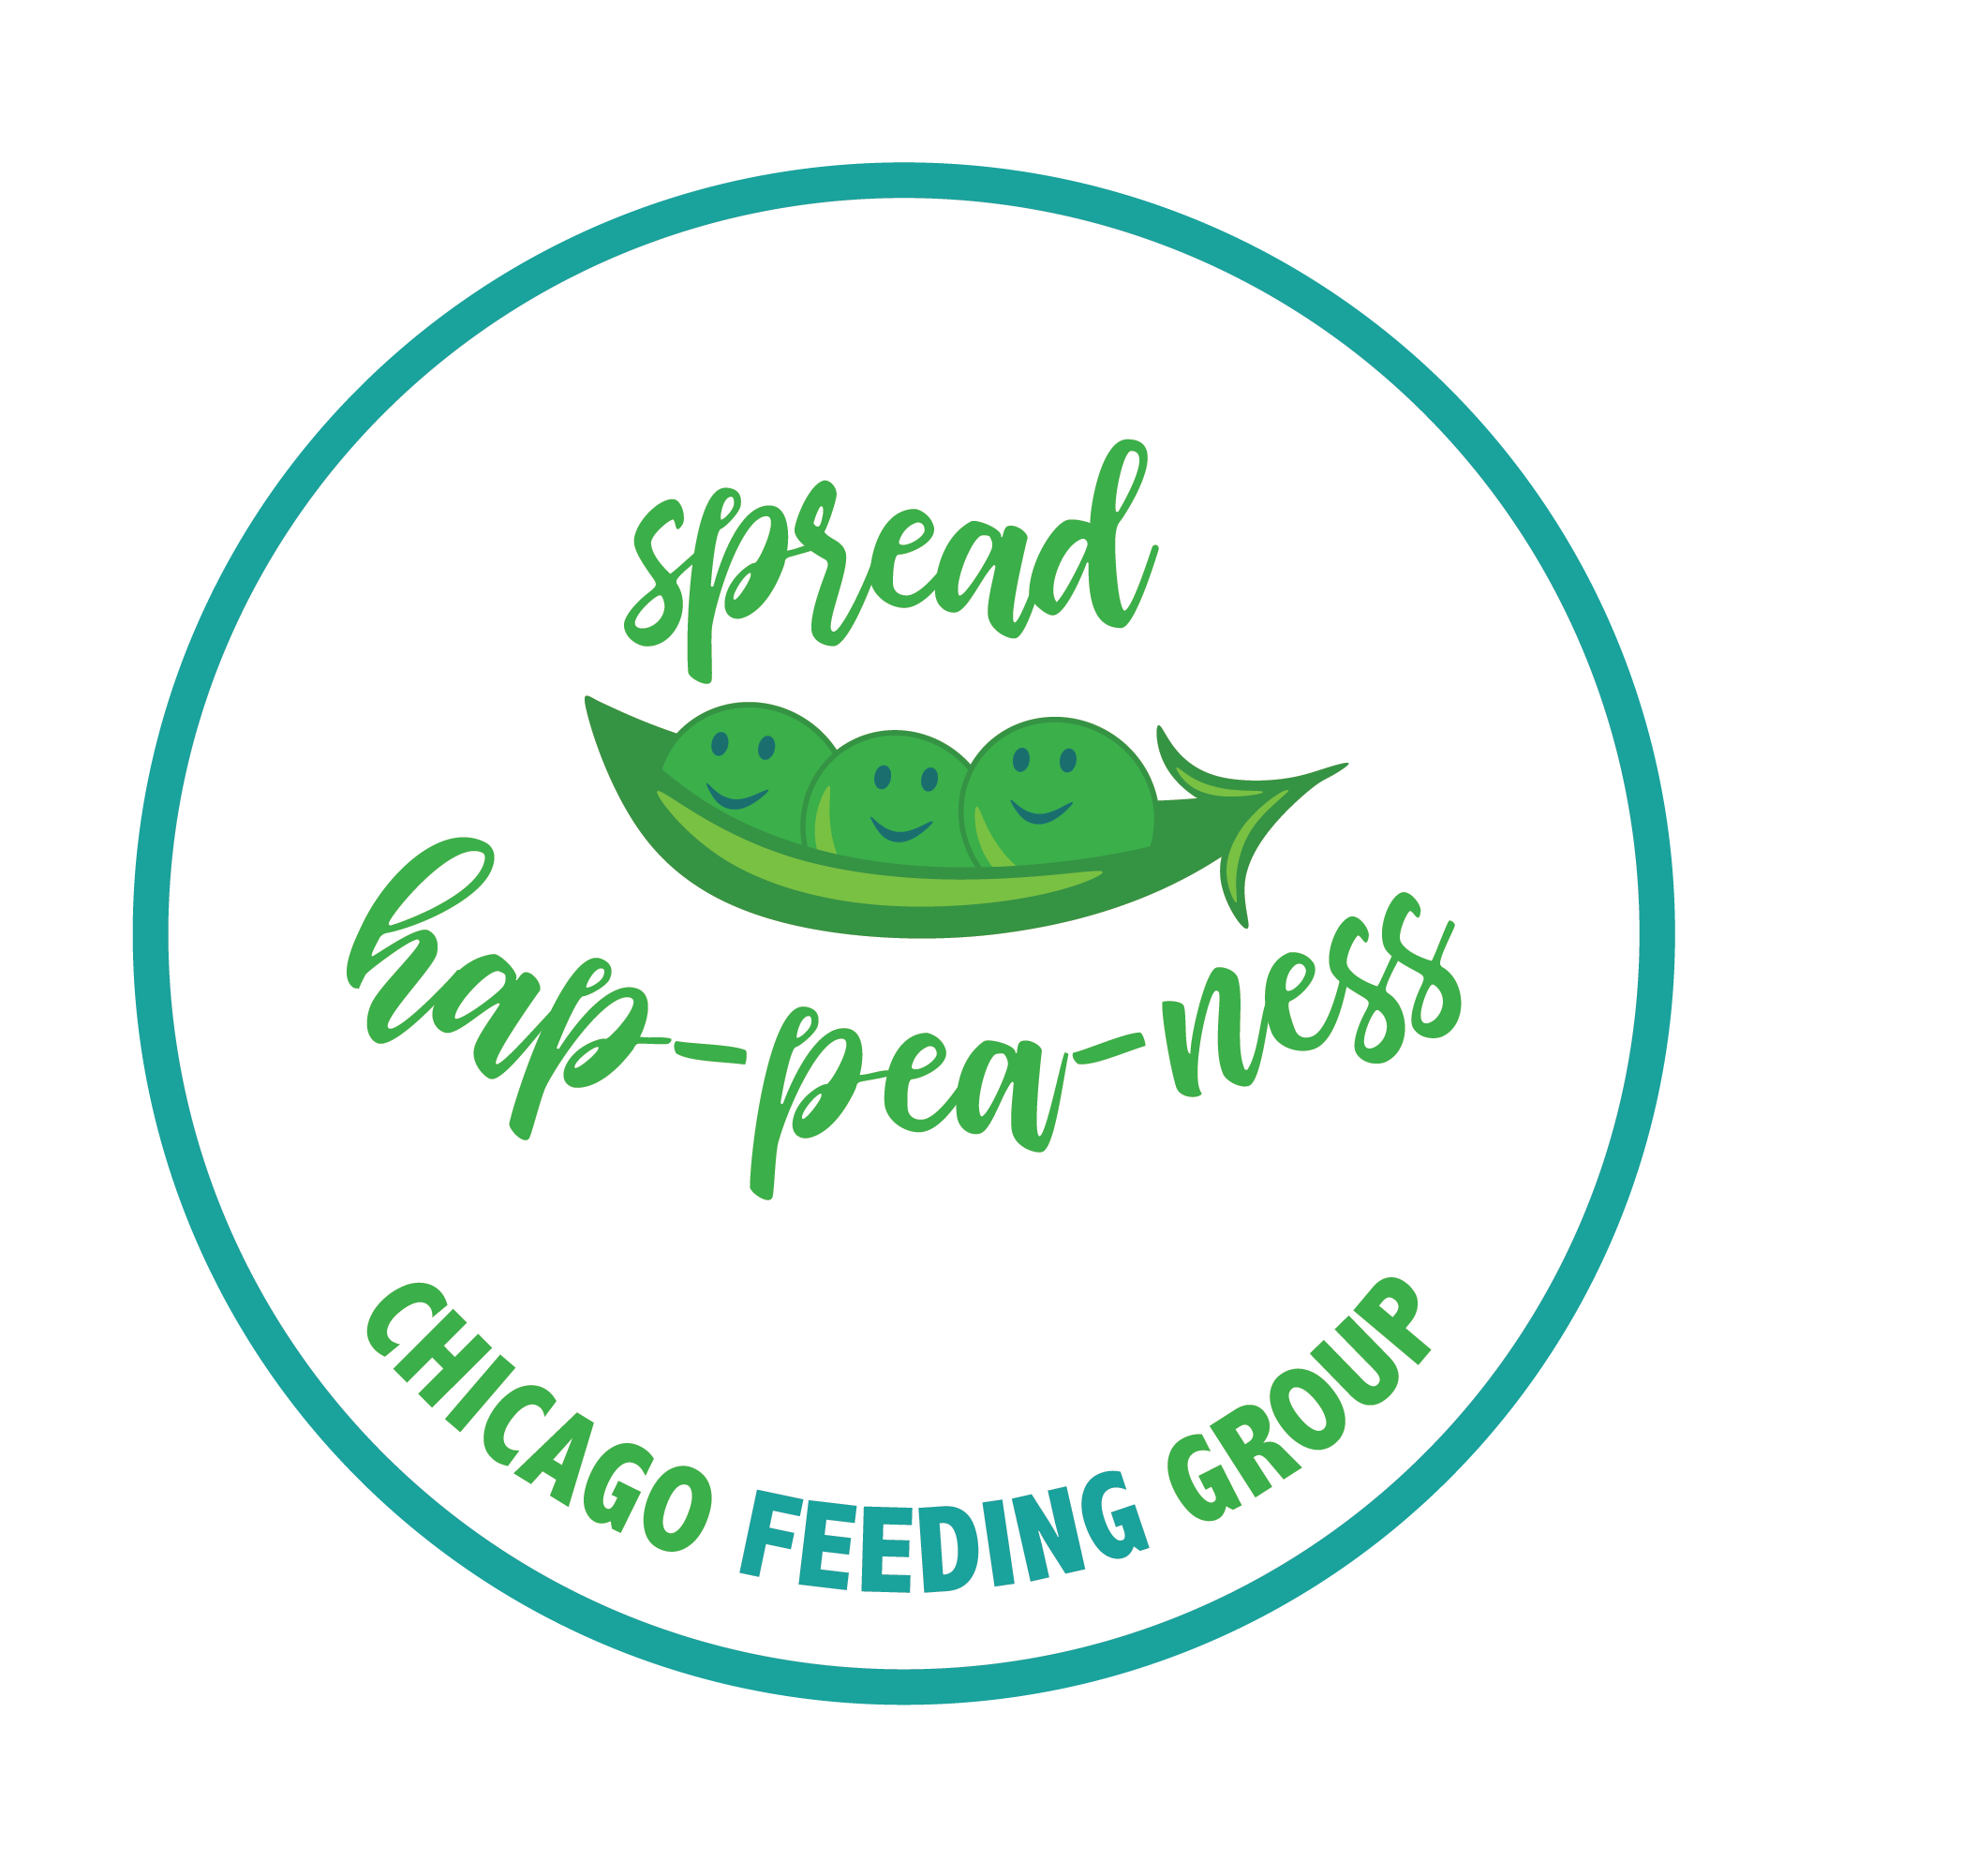 CHICAGO FEEDING GROUP FOOD PUN  Stickers - humanKIND